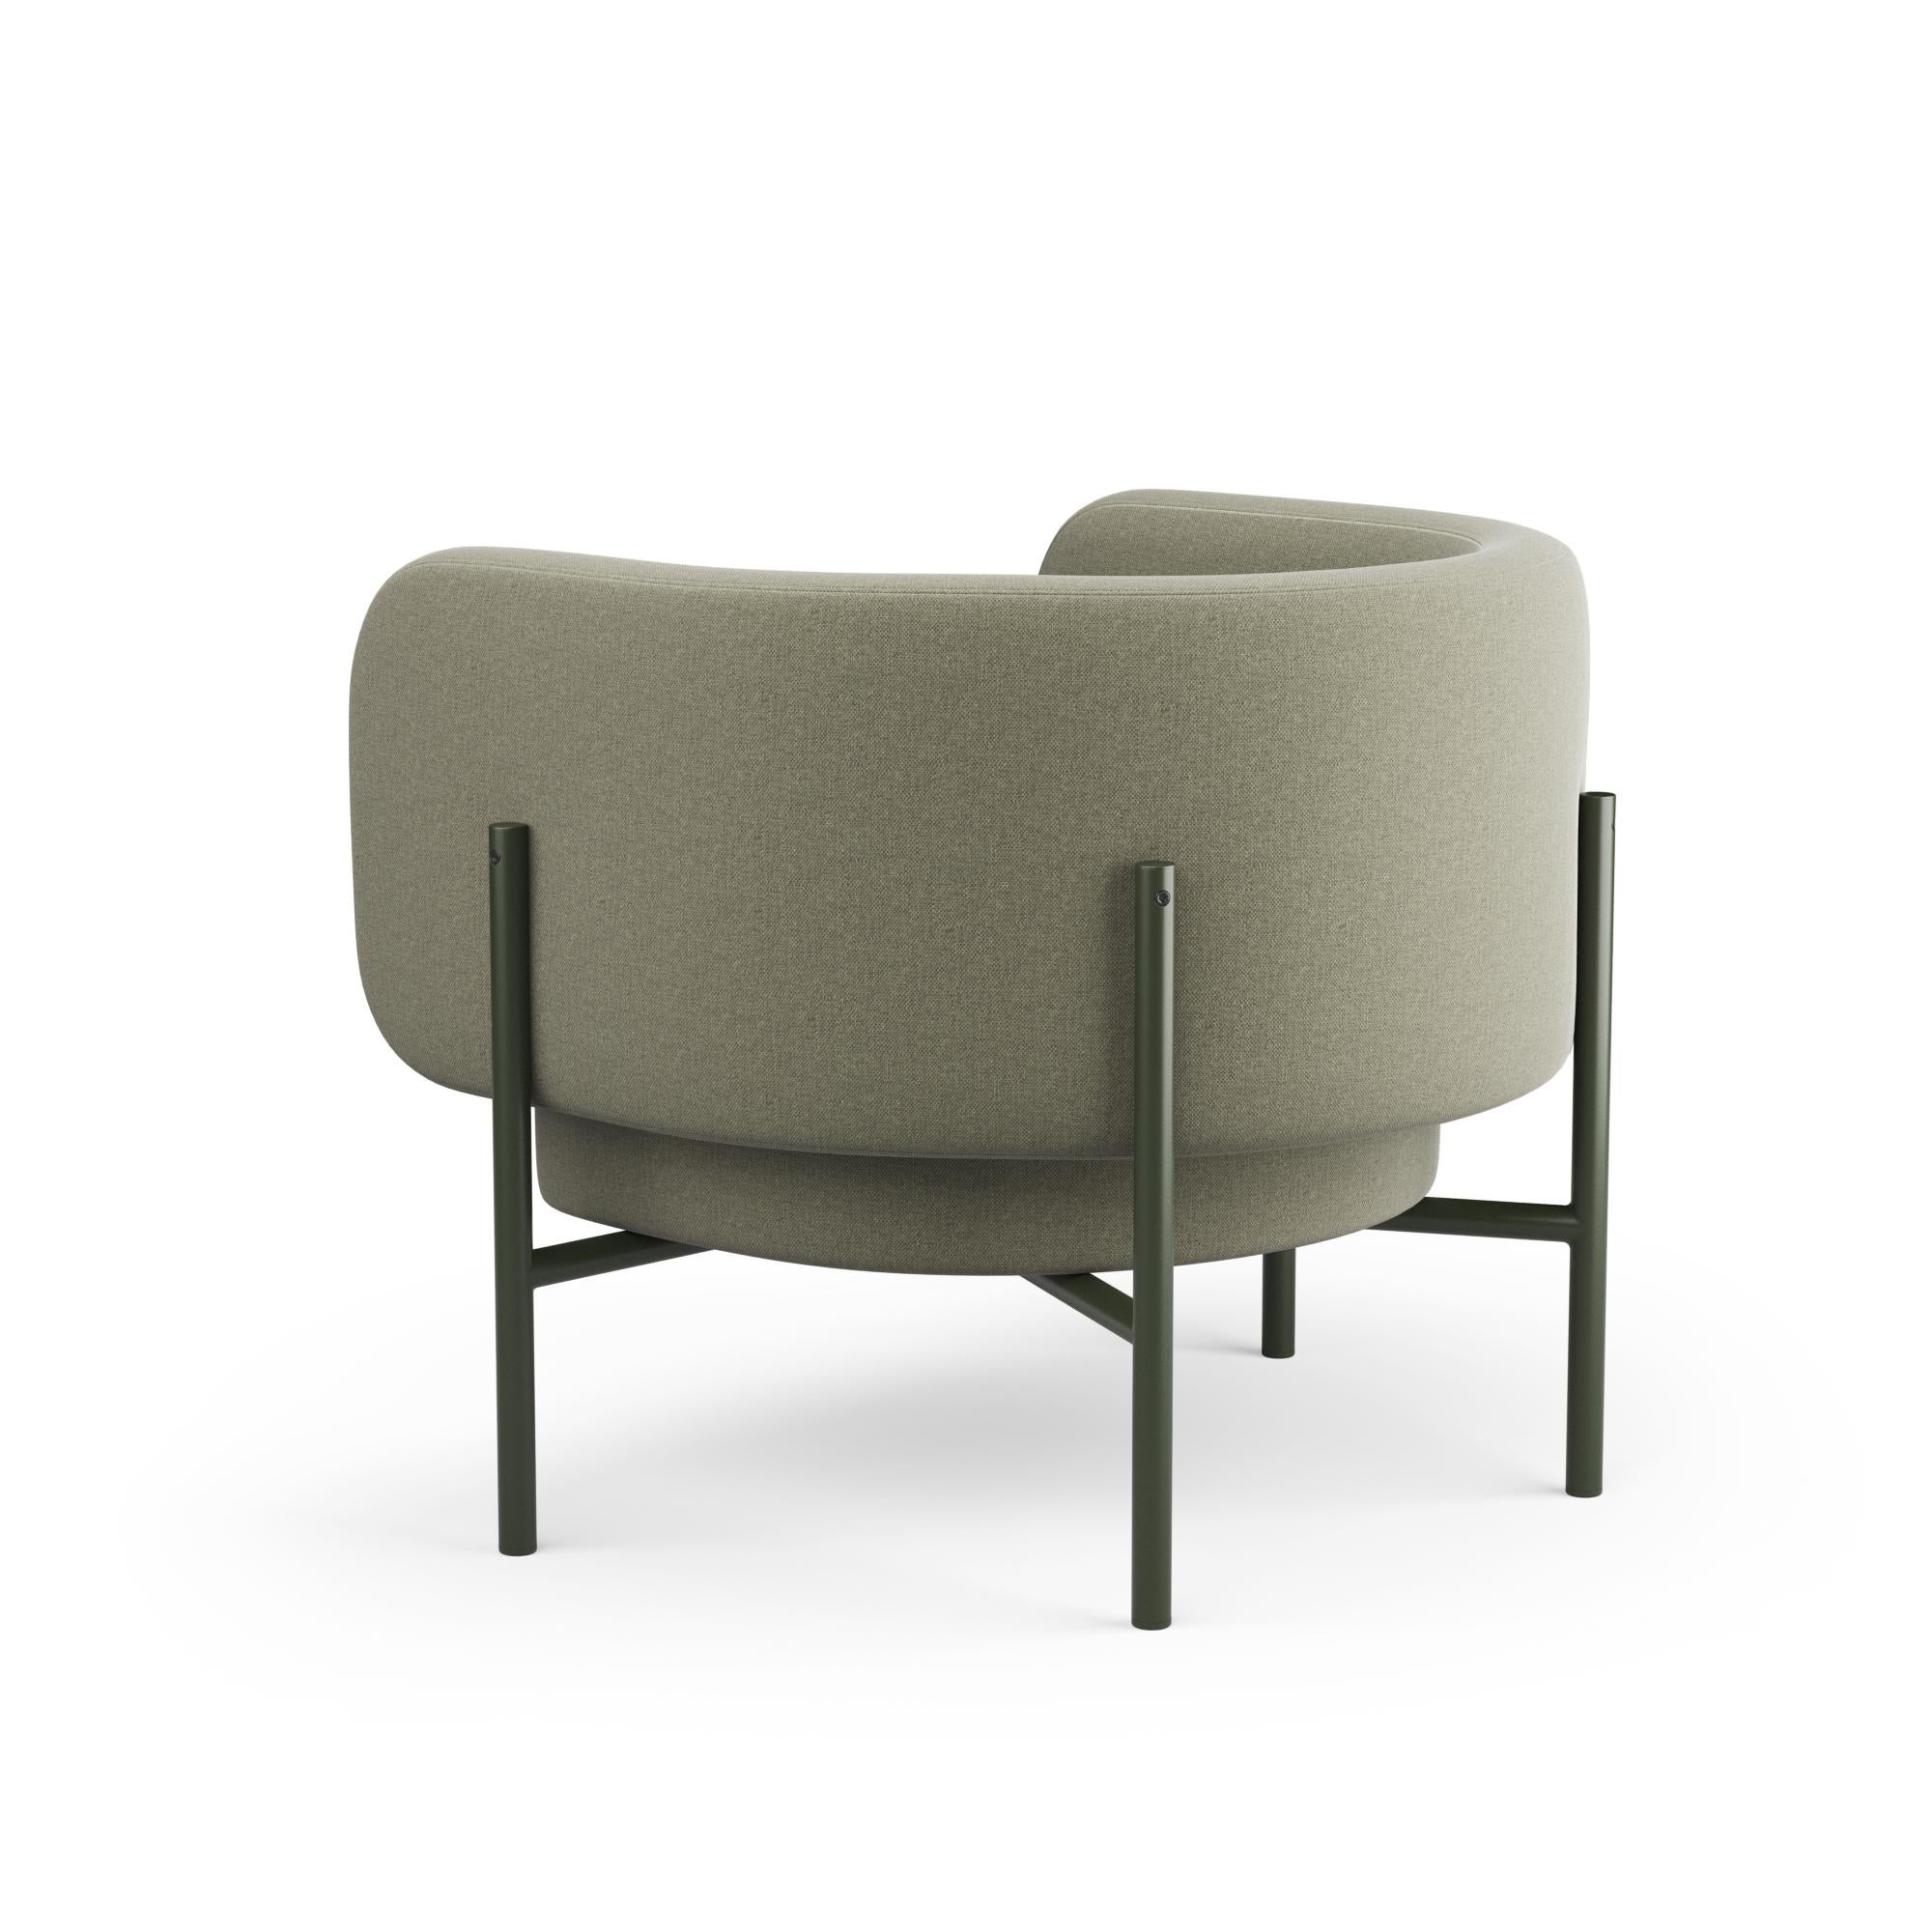 European Hayche Abrazo Armchair - Green, UK, Made to Order For Sale